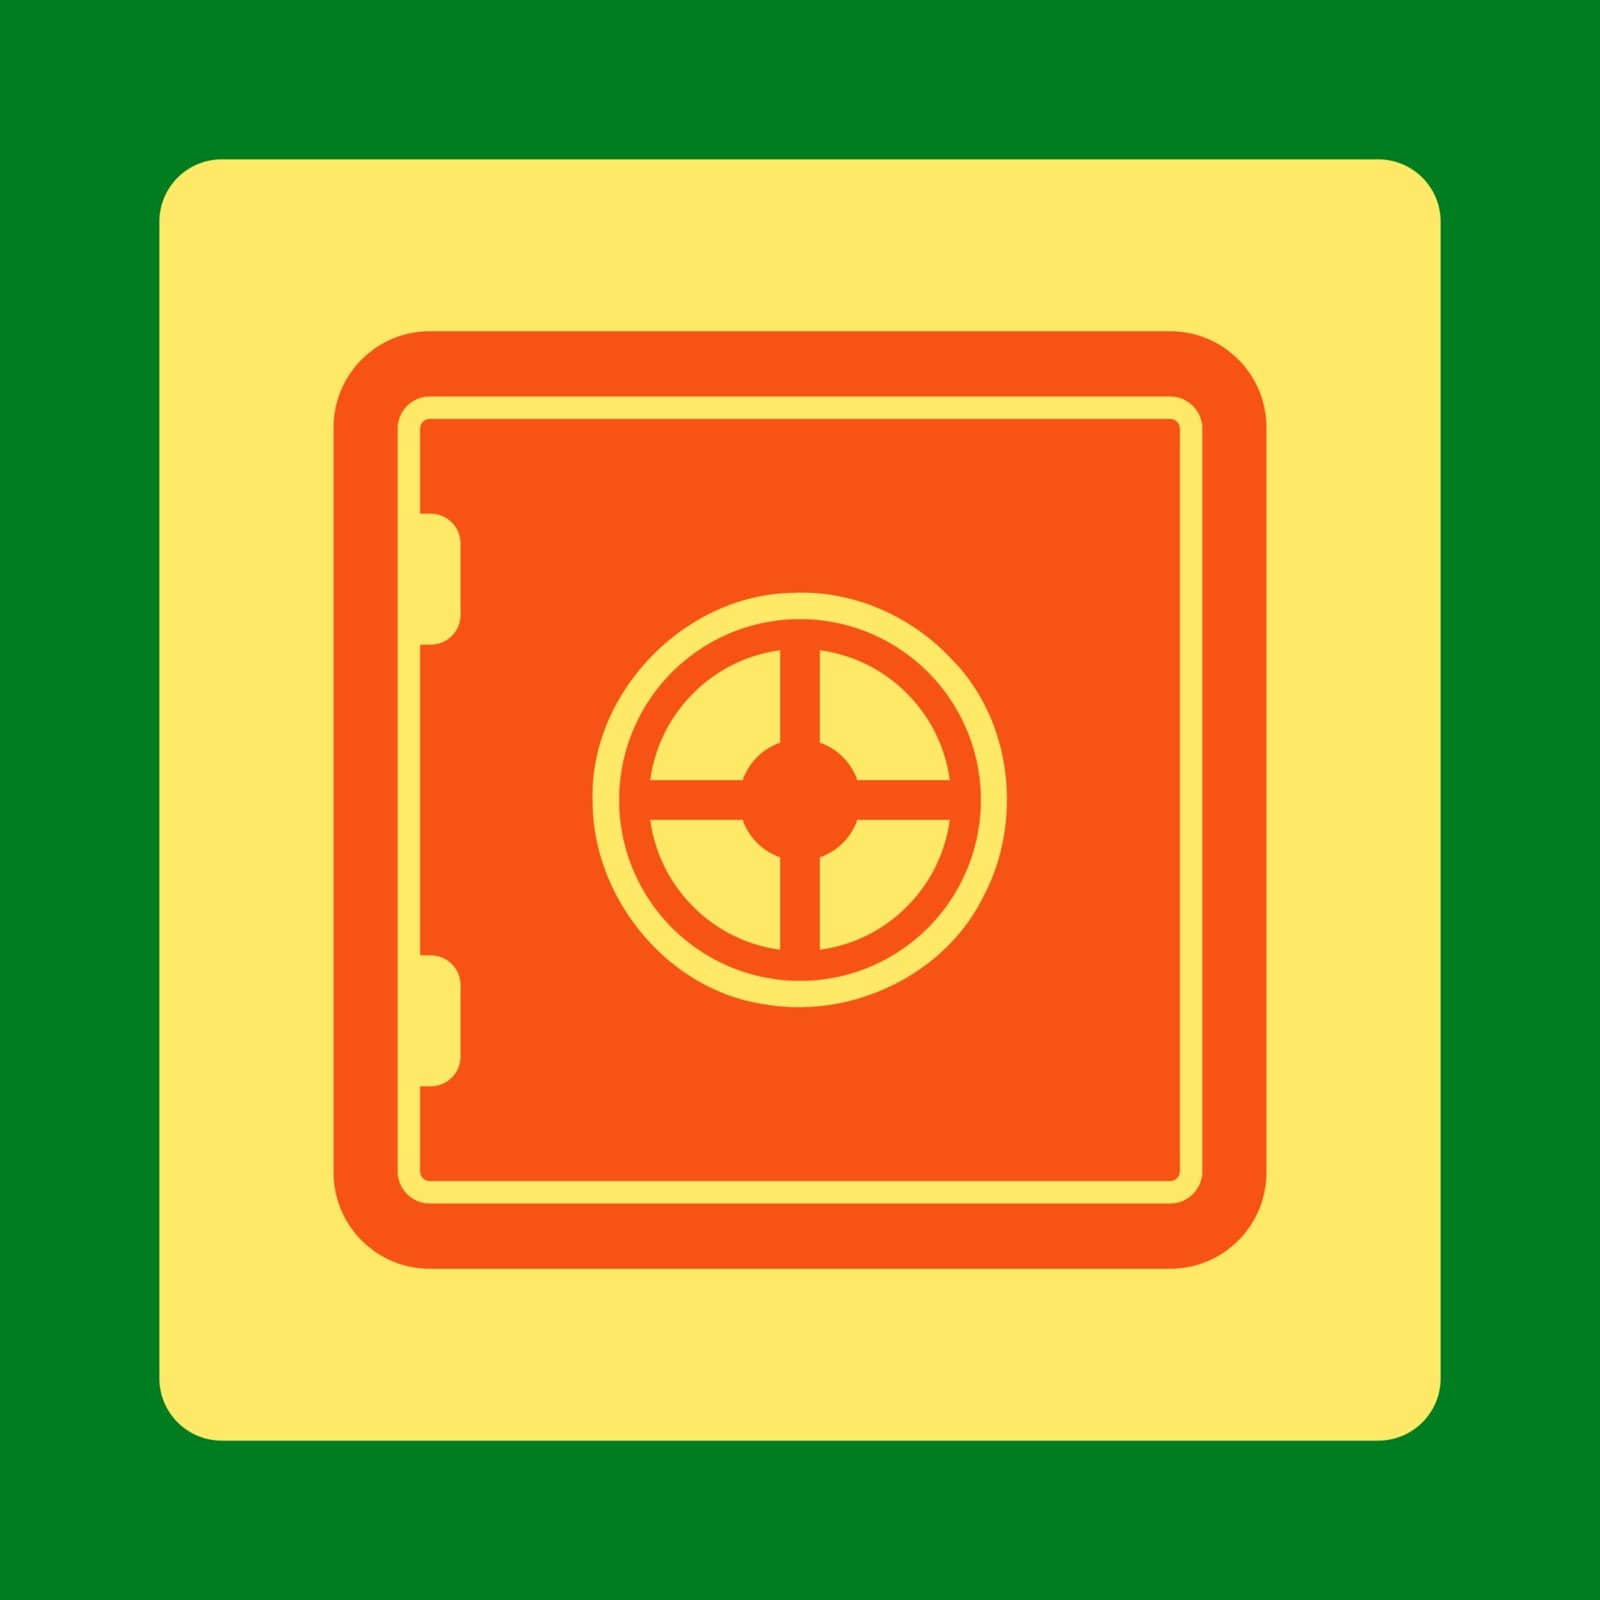 Safe icon. This flat rounded square button uses orange and yellow colors and isolated on a green background.